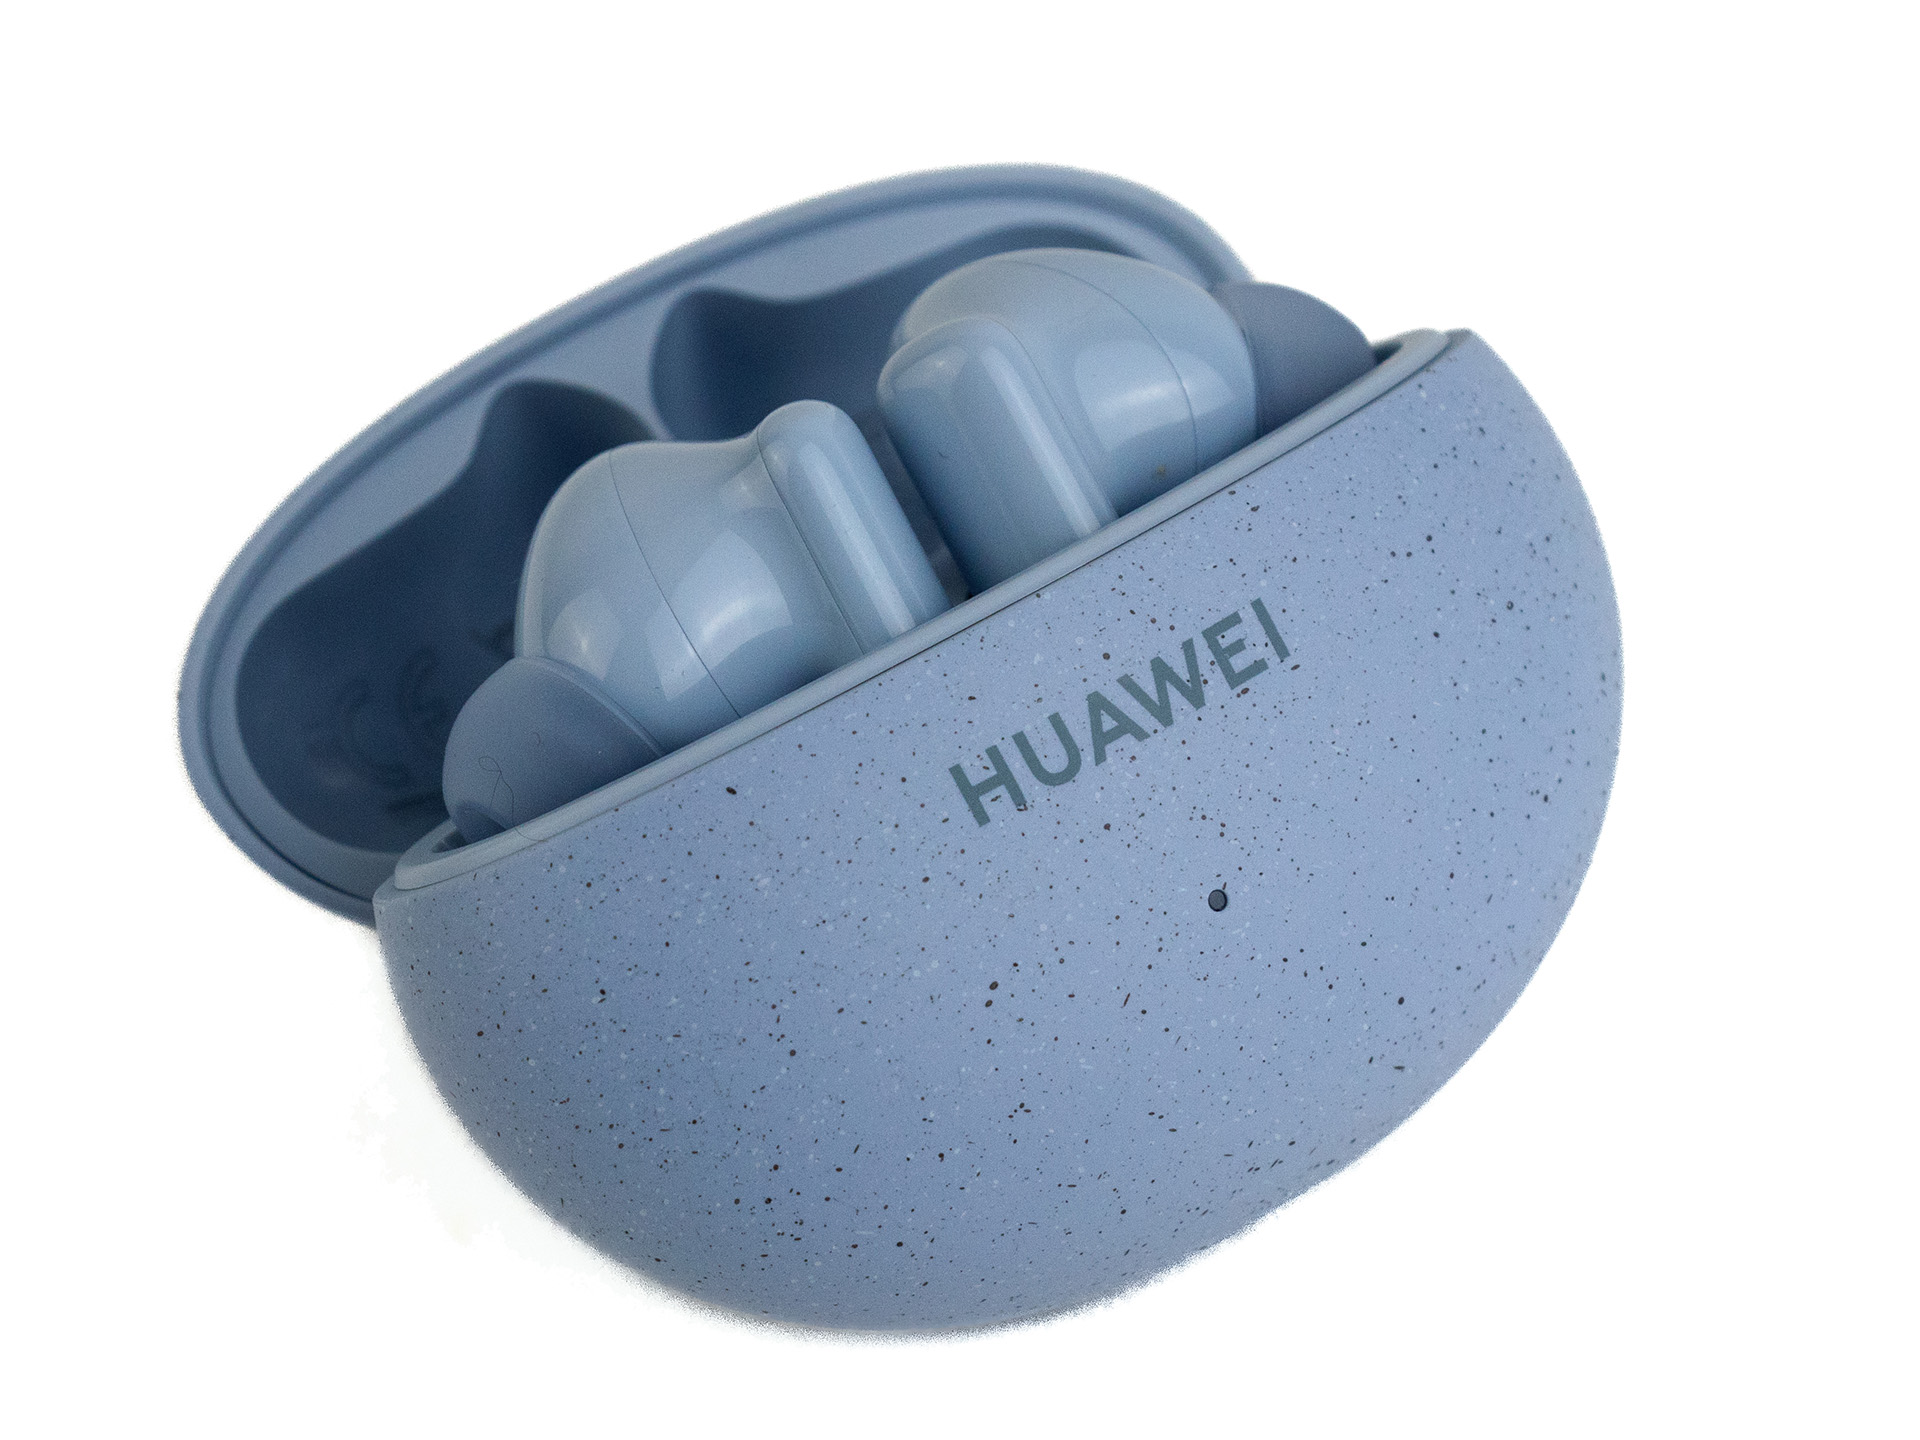 Huawei FreeBuds 5i review - Affordable in-ear headphones with LDAC